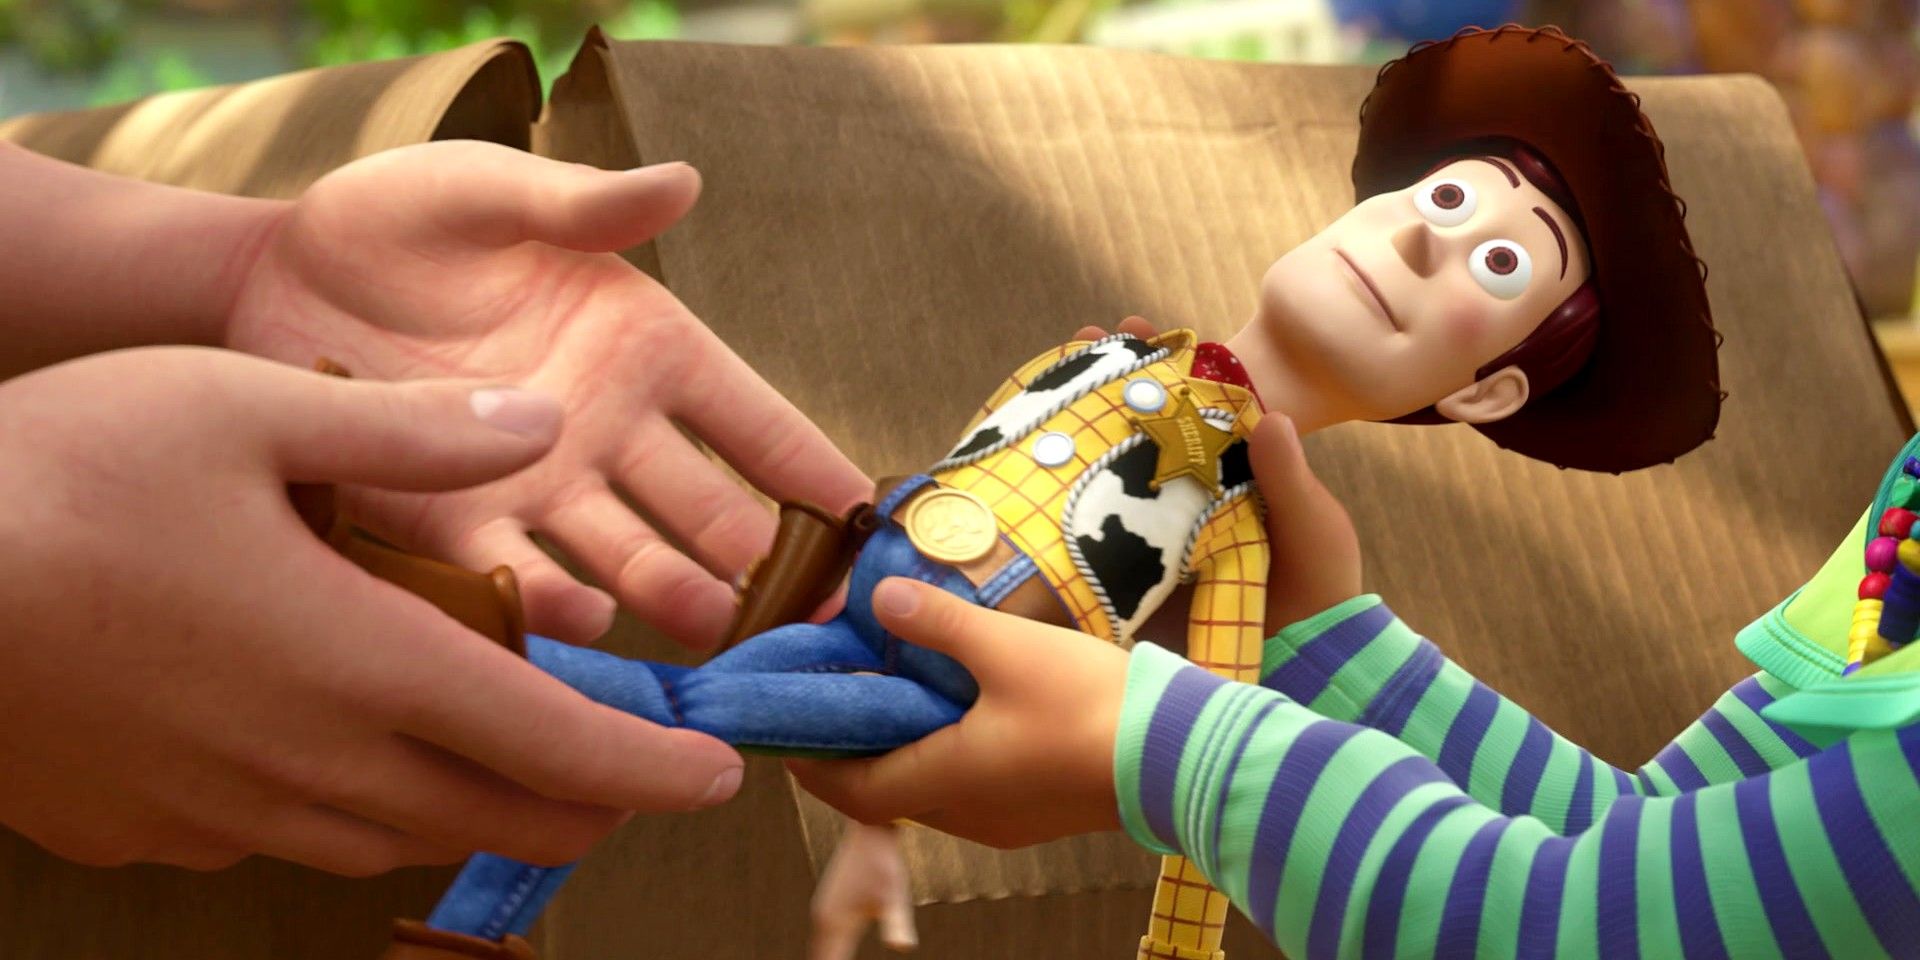 The Making of “Toy Story 3”